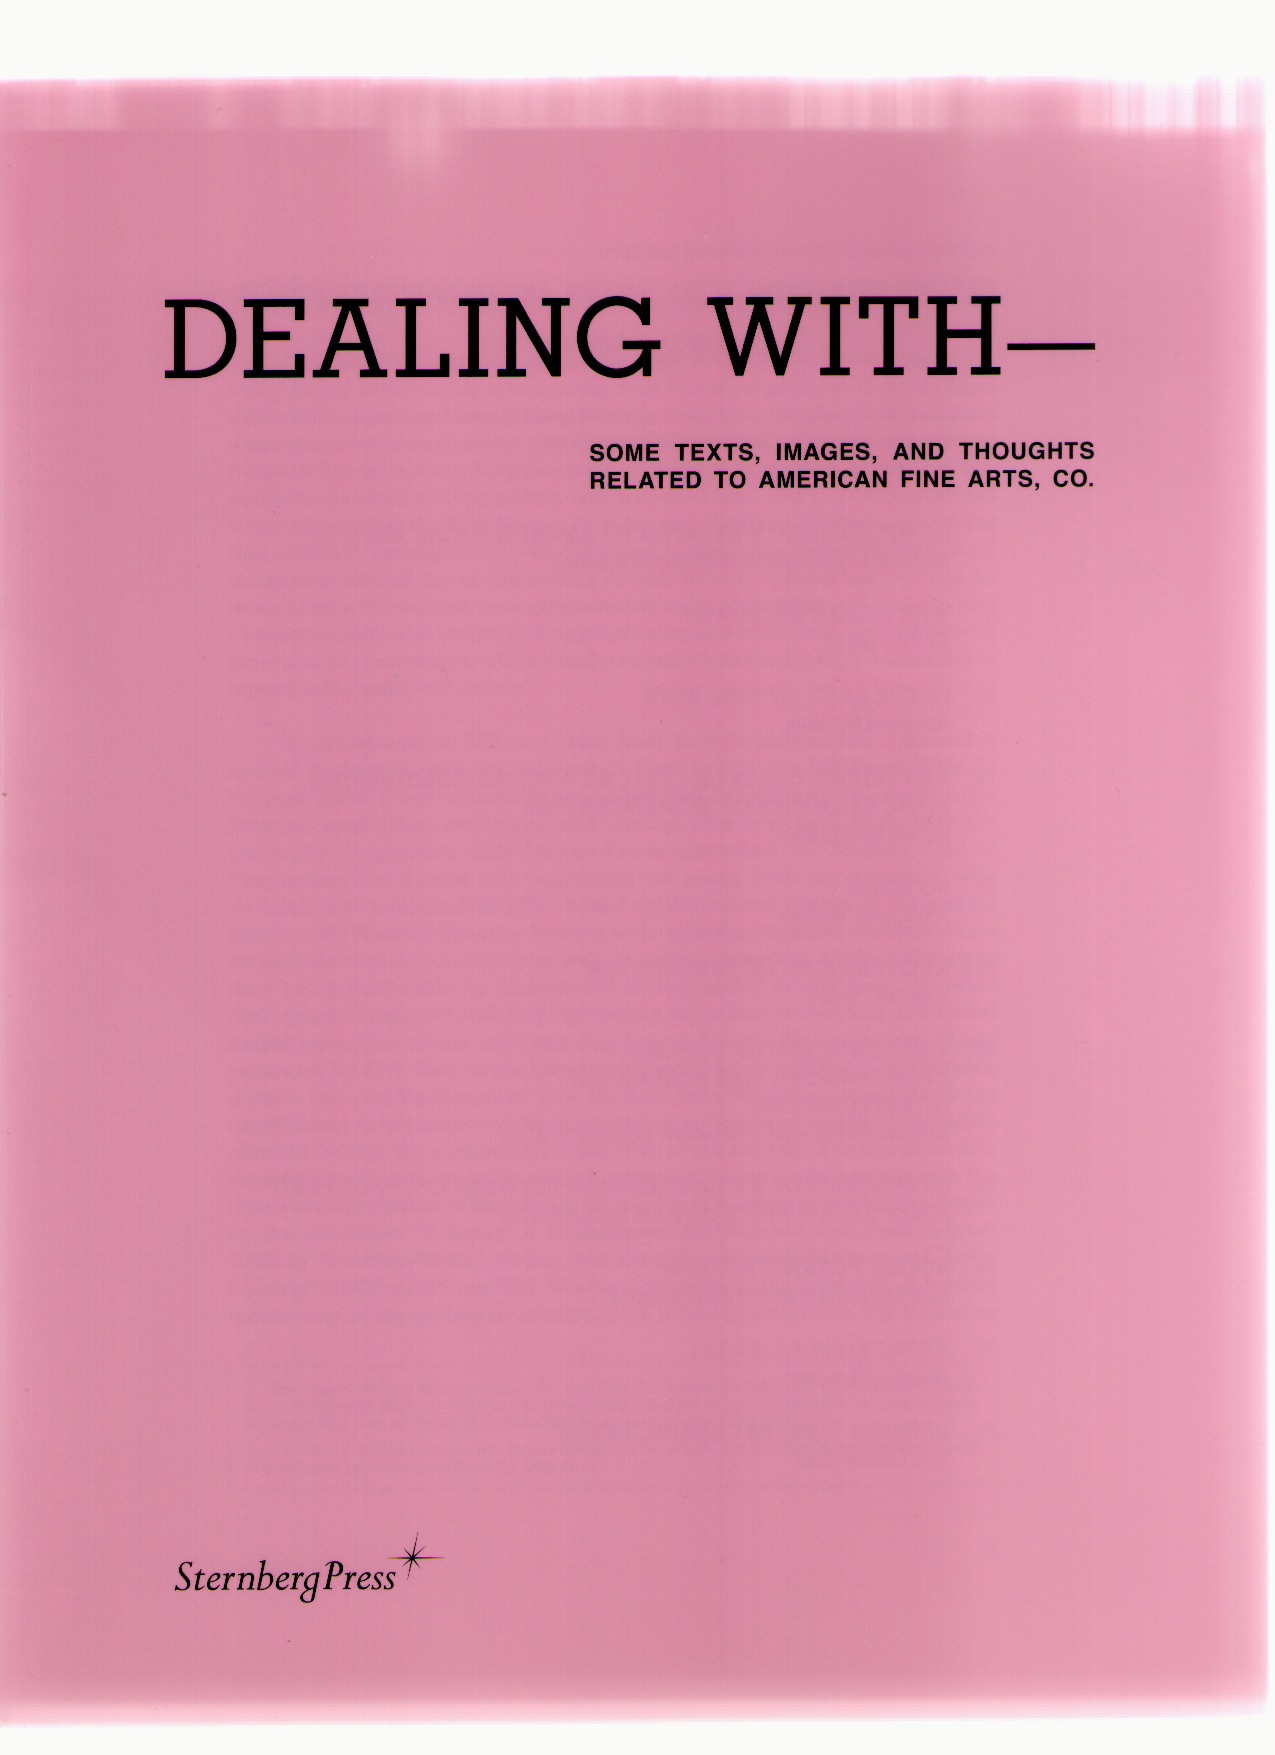 SCHÄFER, Magnus; LOICHINGER, Hannes (eds.) - Dealing with—some texts, images, and thoughts related to American Fine Arts, co.